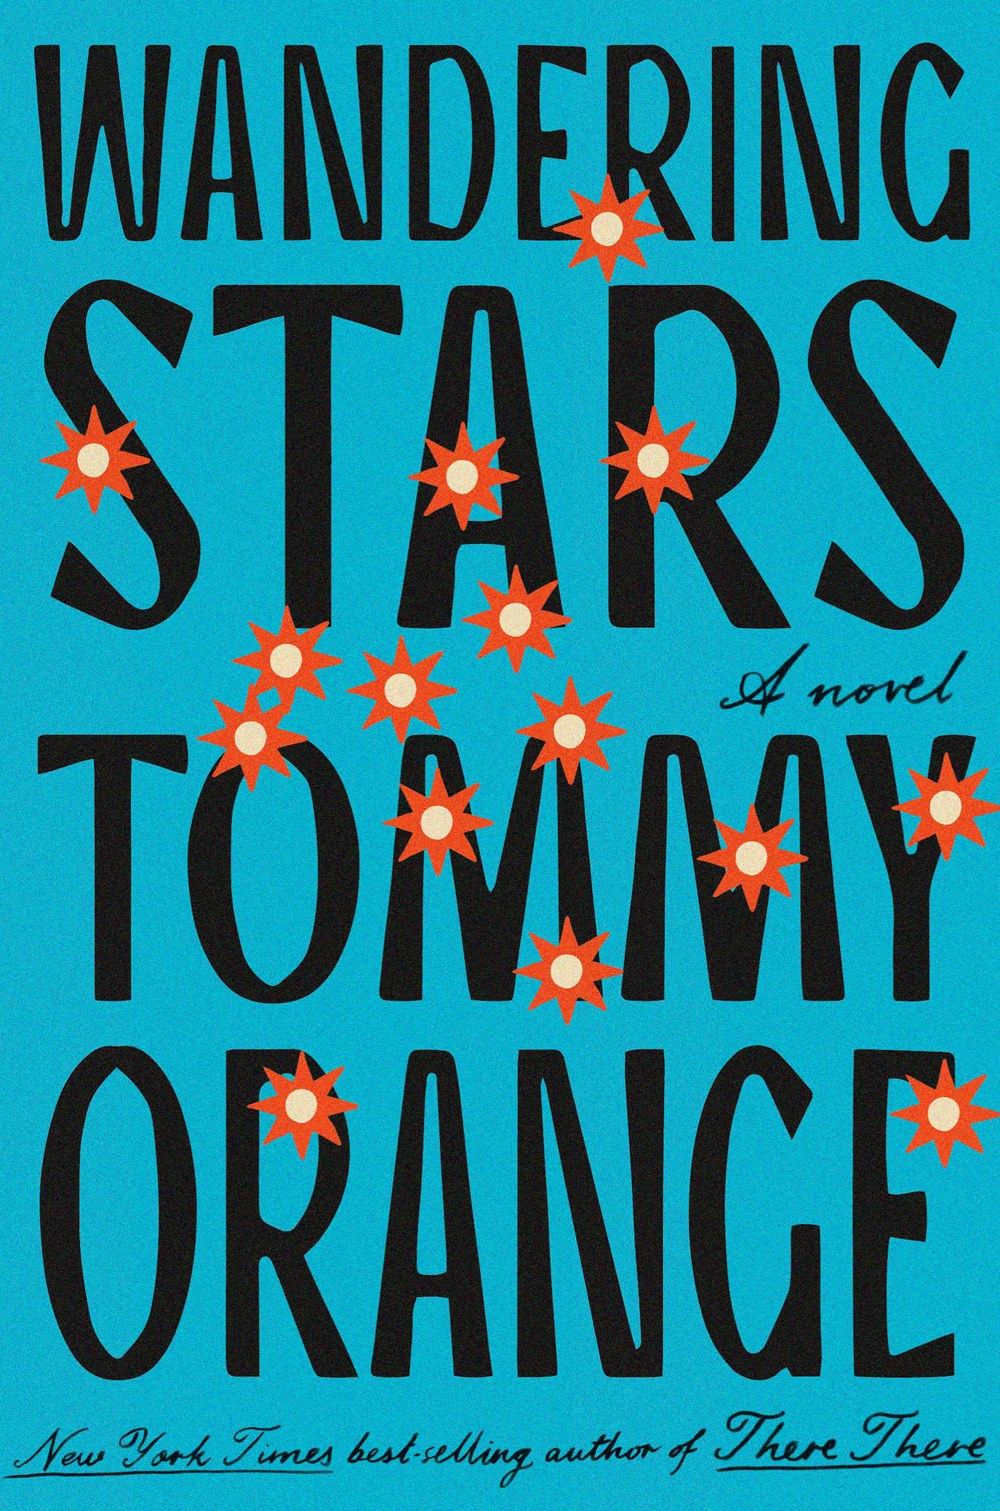 Wandering Stars by Tommy Orange (Hardcover) (PREORDER)